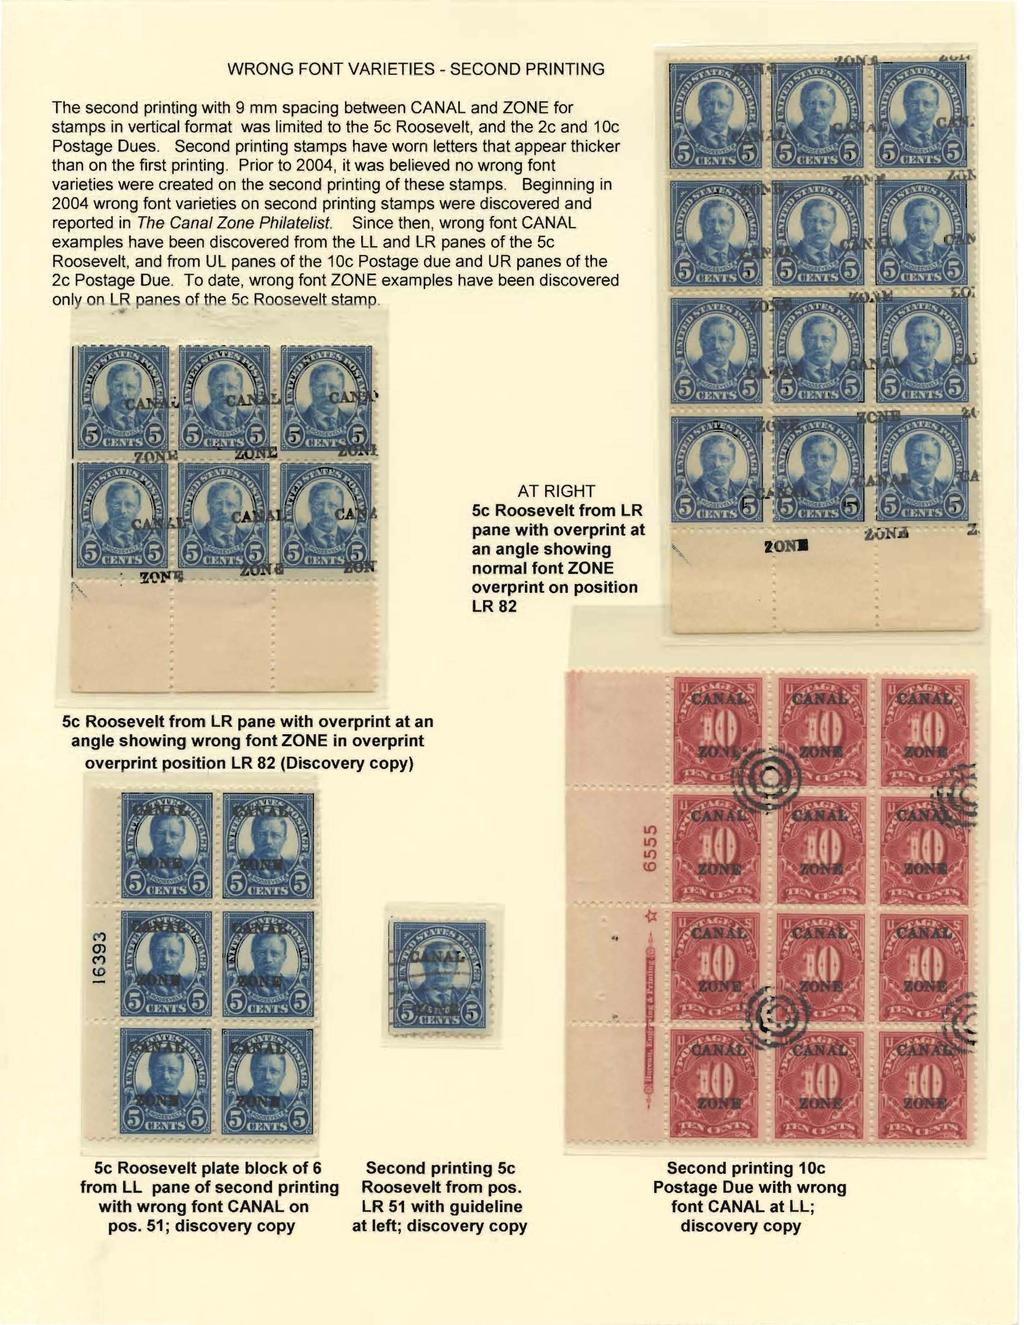 WRONG FONT VARIETIES - SECOND PRINTING The second printing with 9 mm spacing between CANAL and ZONE for stamps in vertical format was limited to the 5c Roosevelt, and the 2c and 10c Postage Dues.